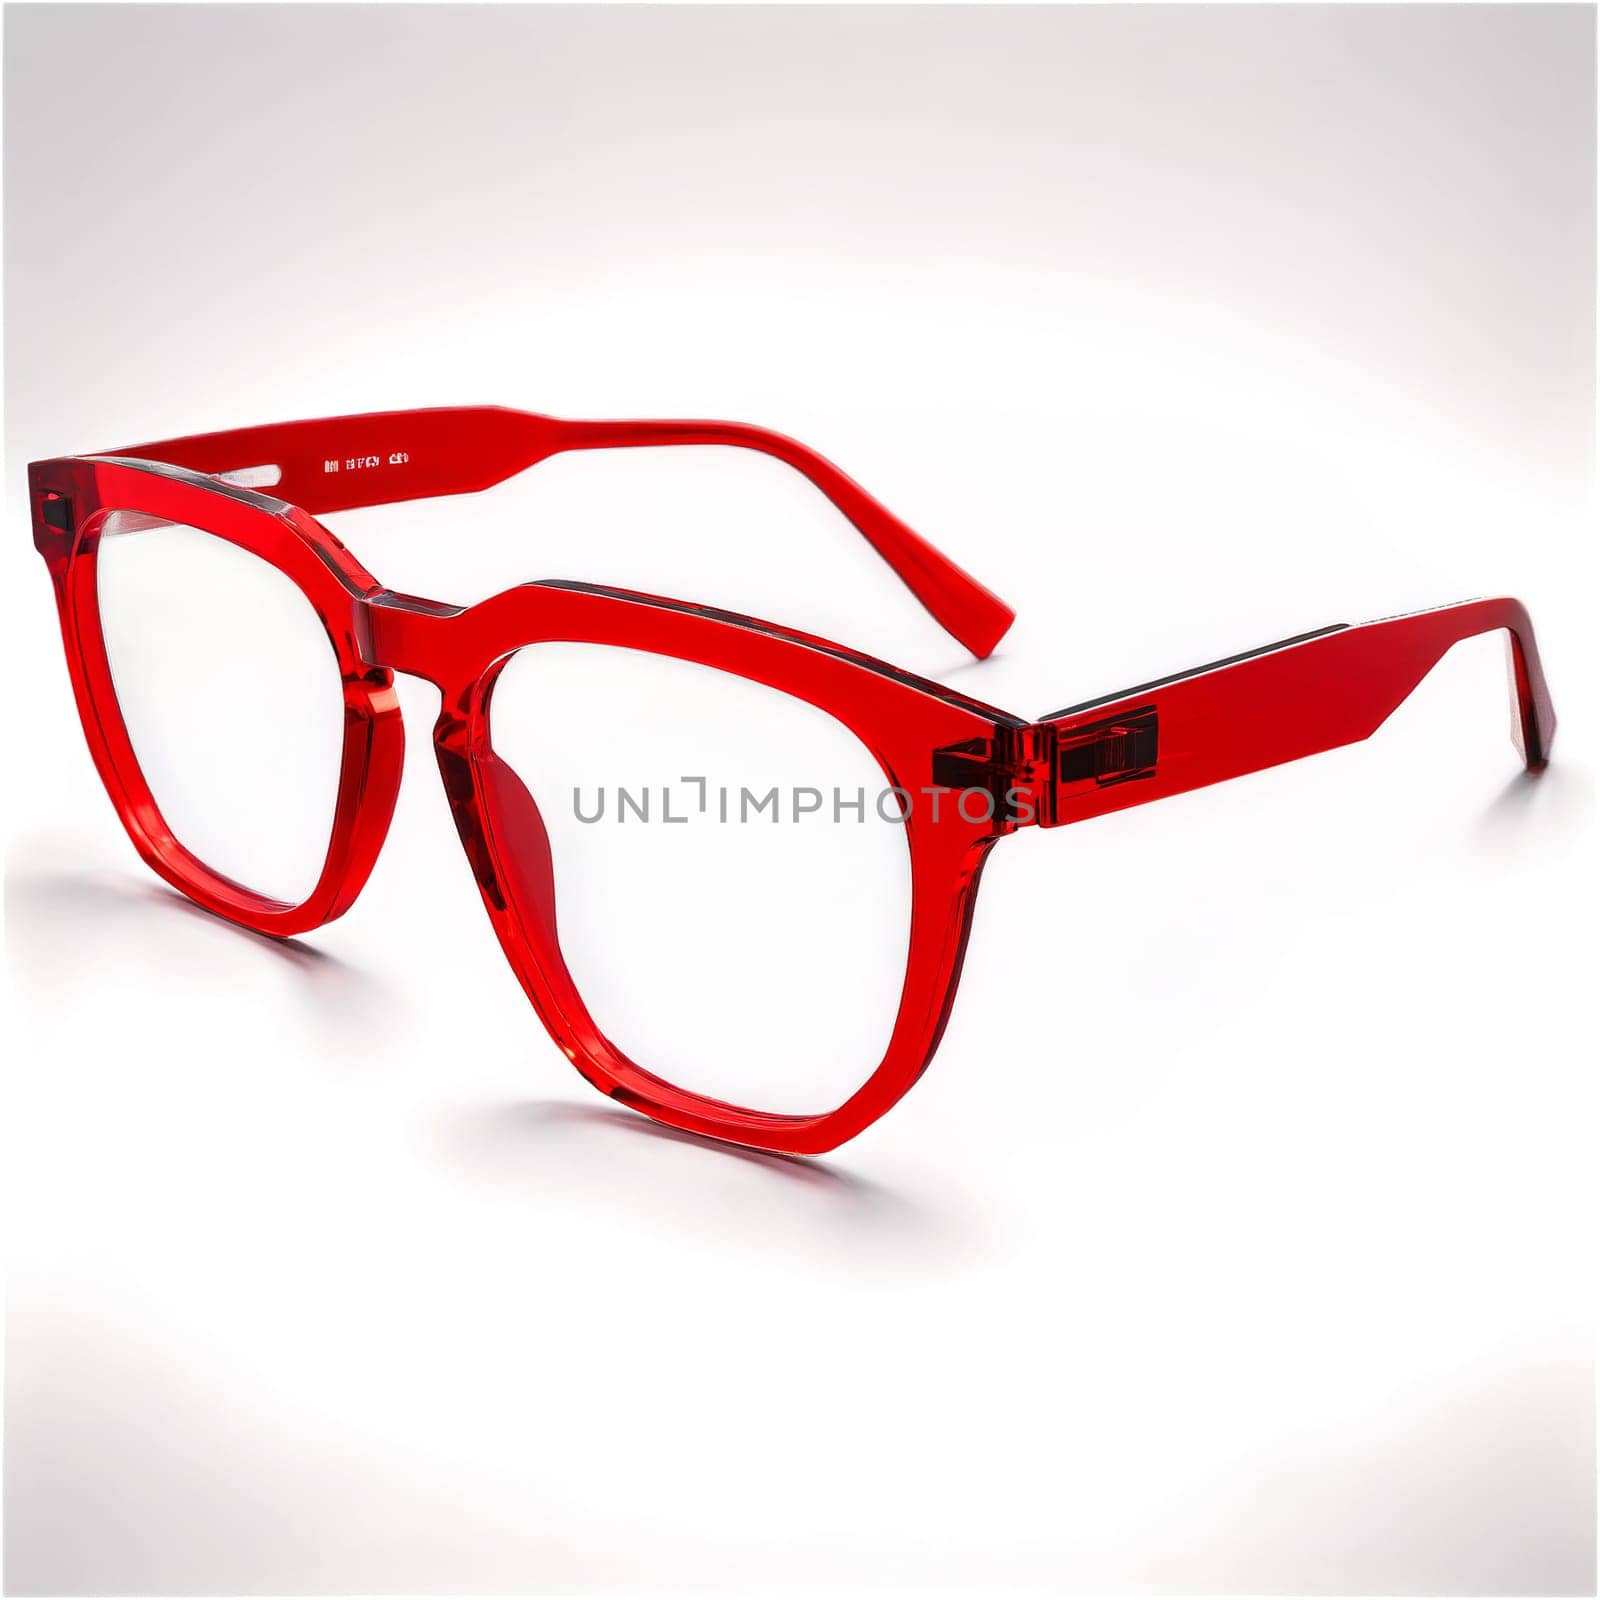 Geometric glasses with bold red acetate frames and clear lenses creating a striking statement piece. Product isolated on transparent background